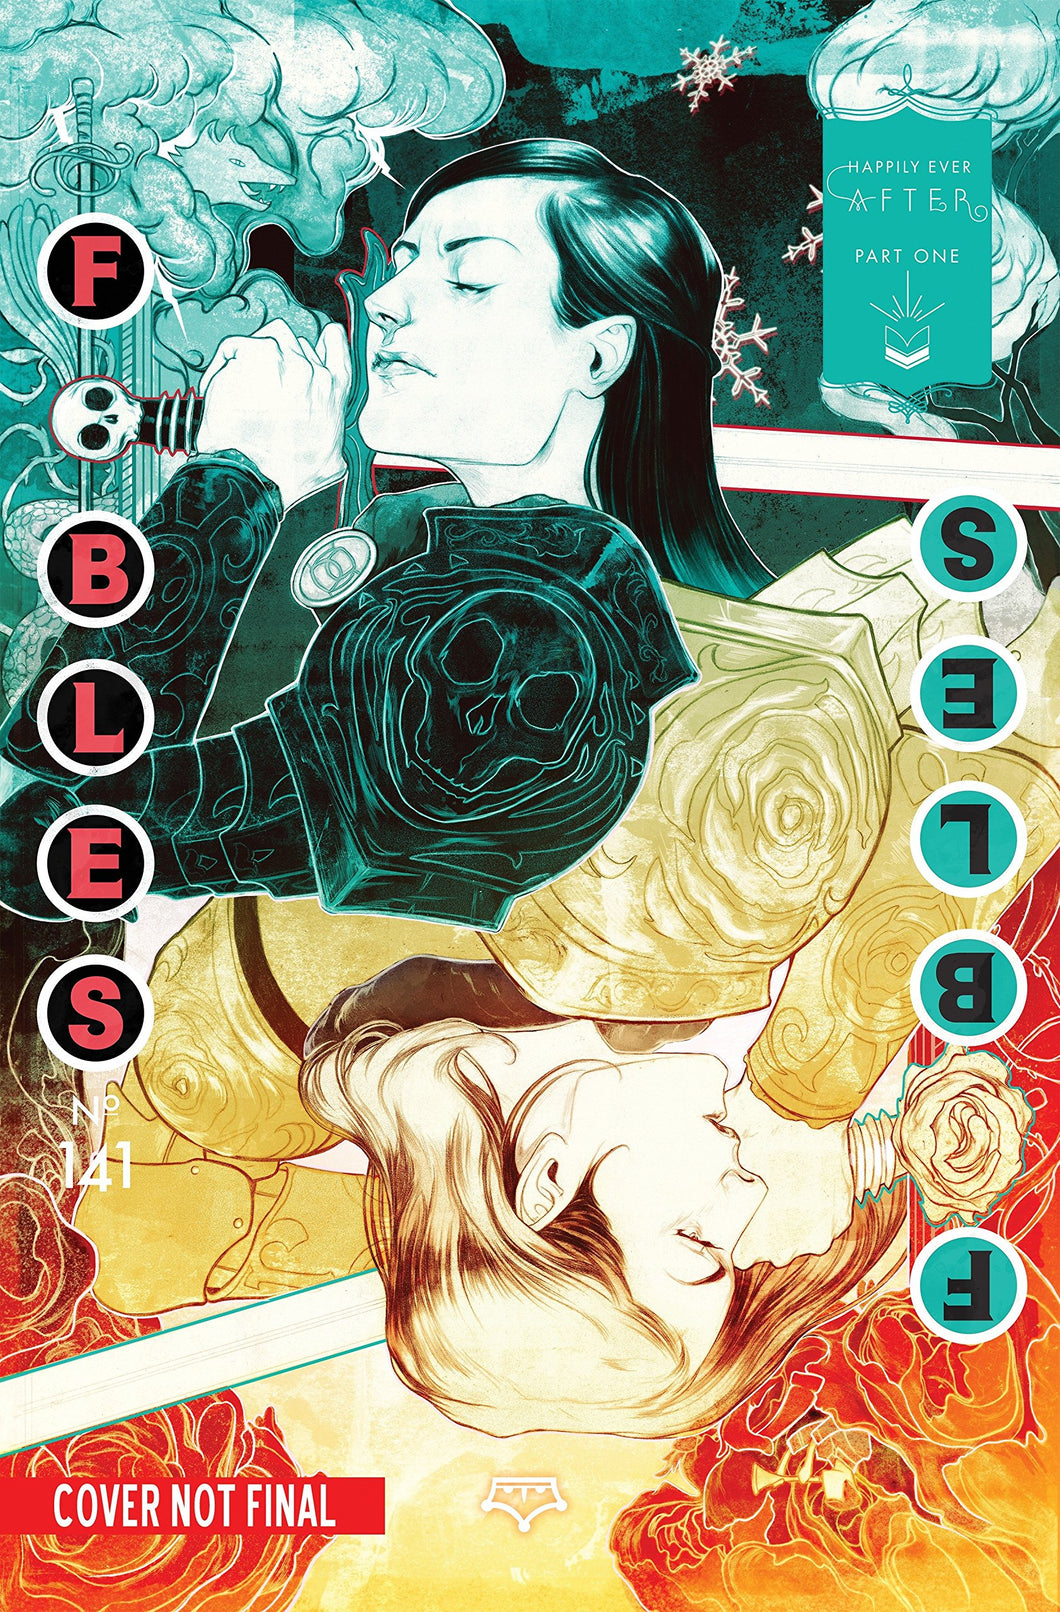 Fables Vol. 21 : Happily Ever After